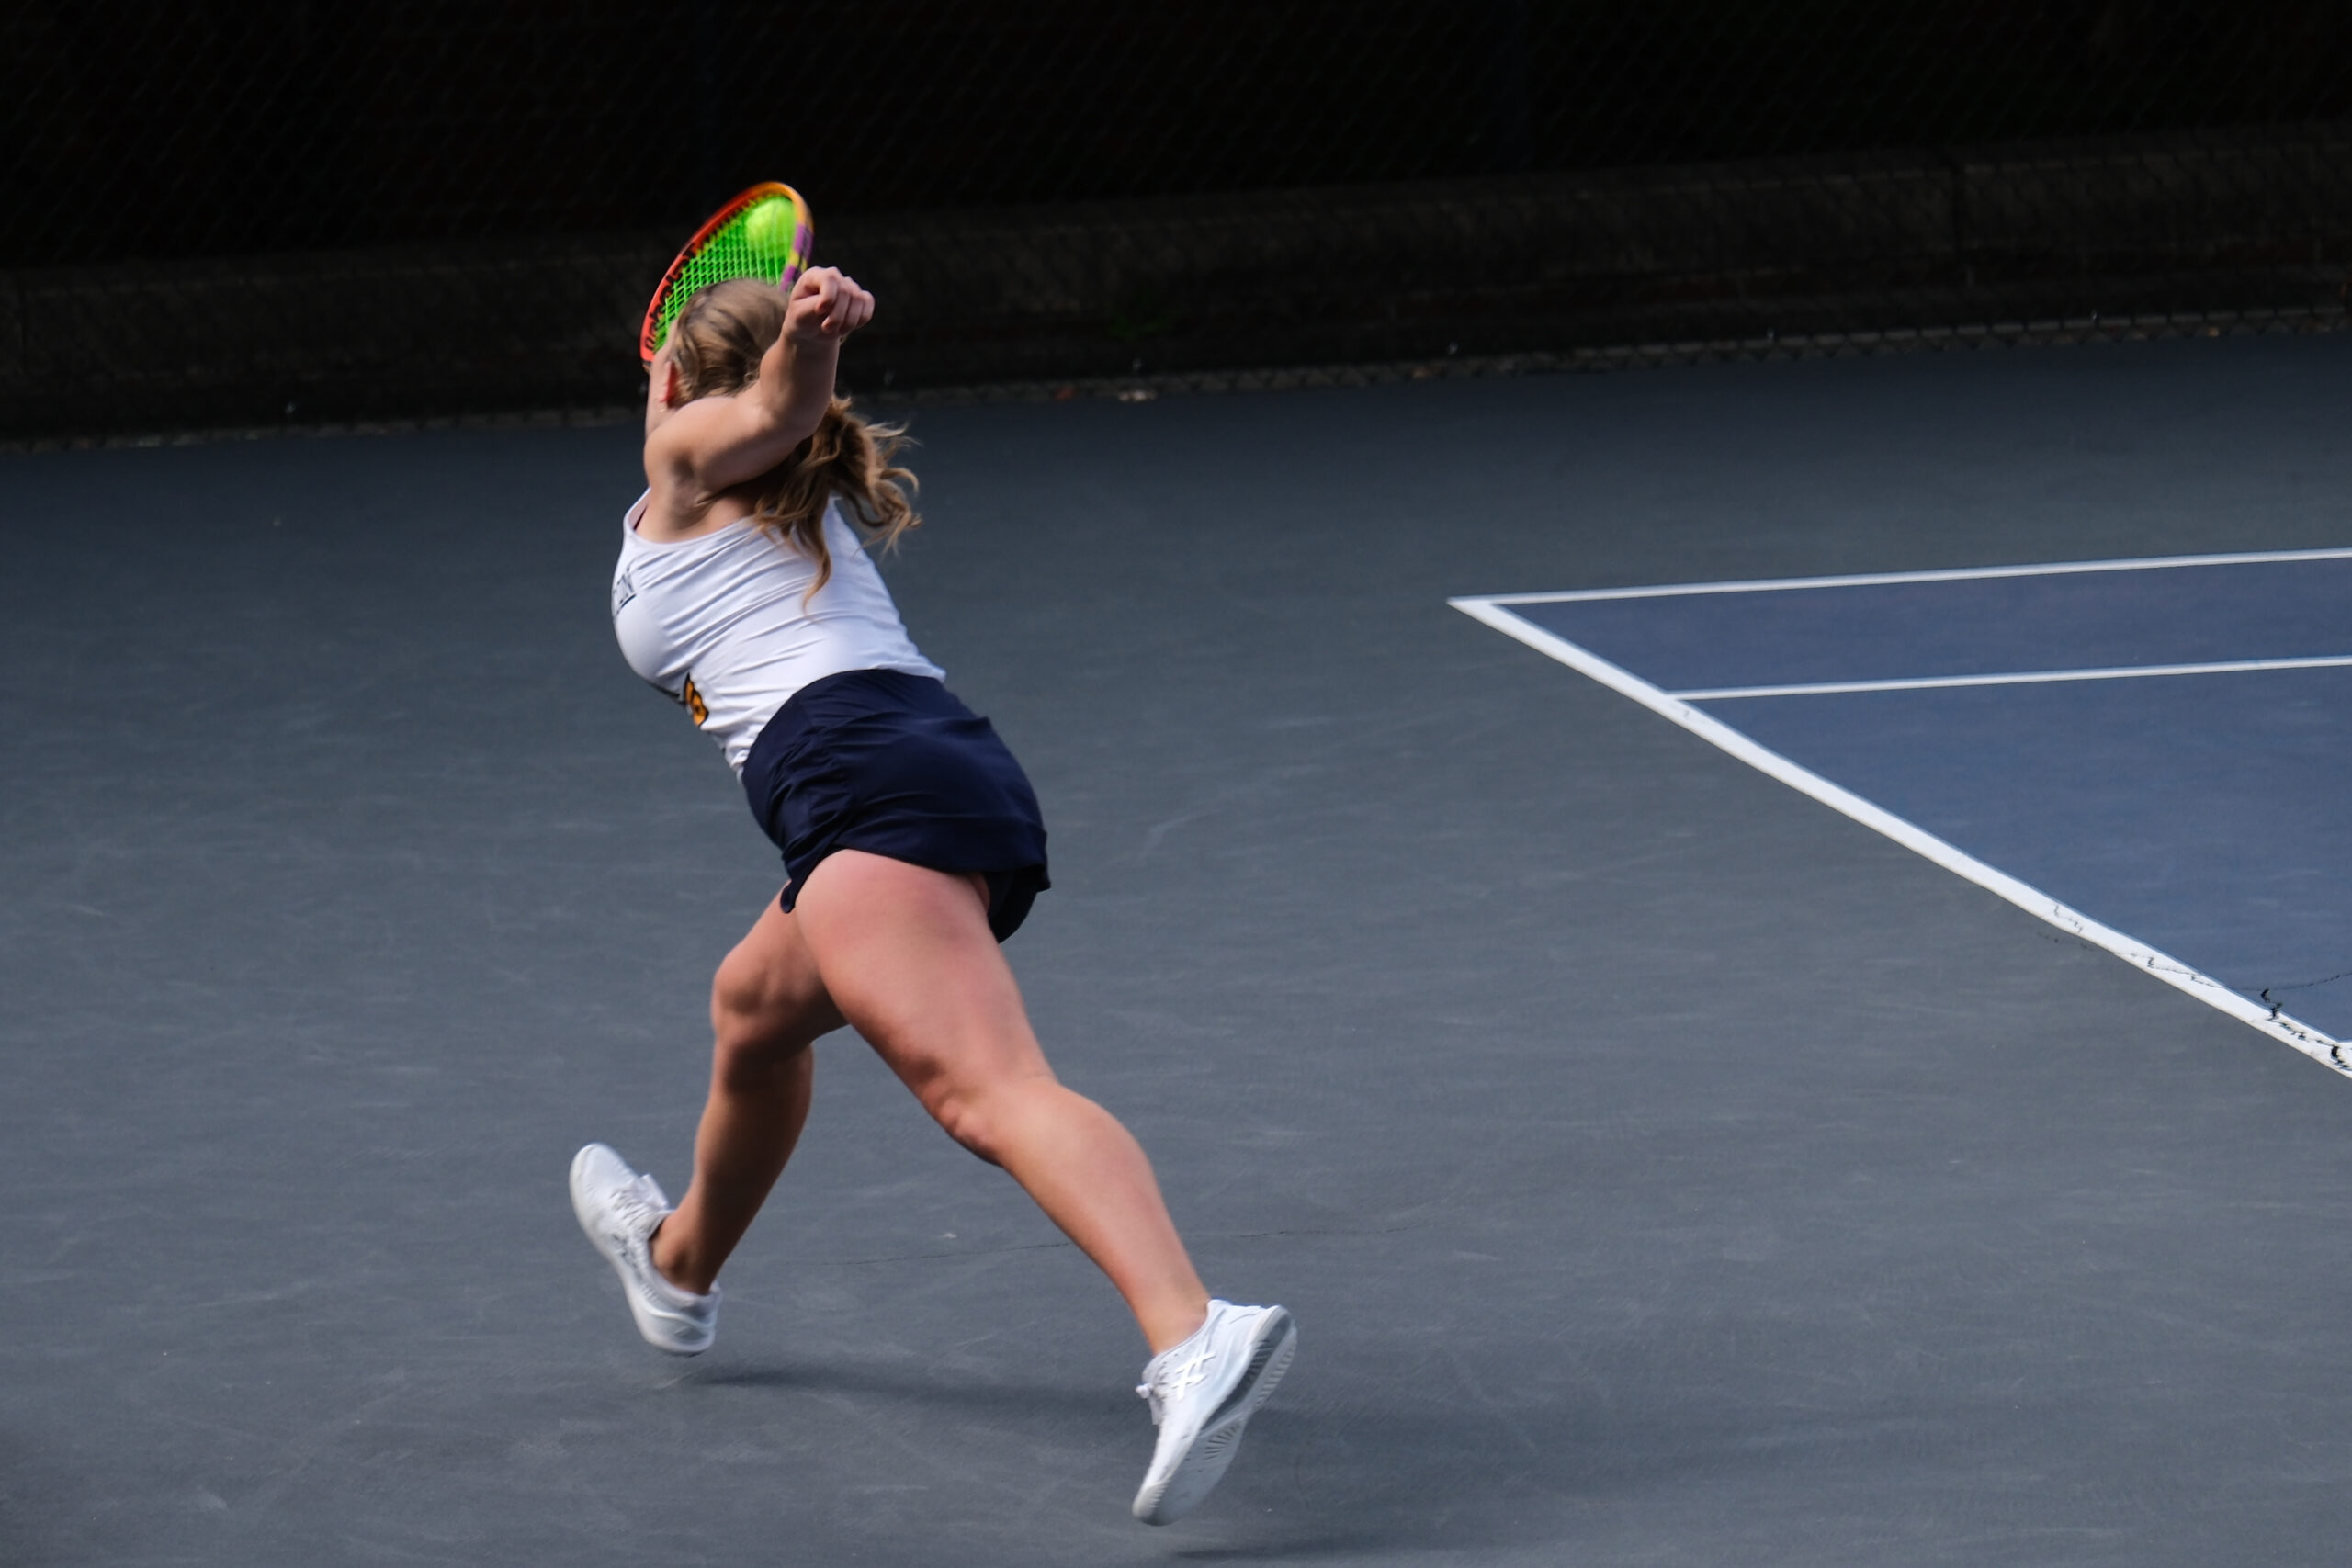 Tennis player stretches to make a shot.